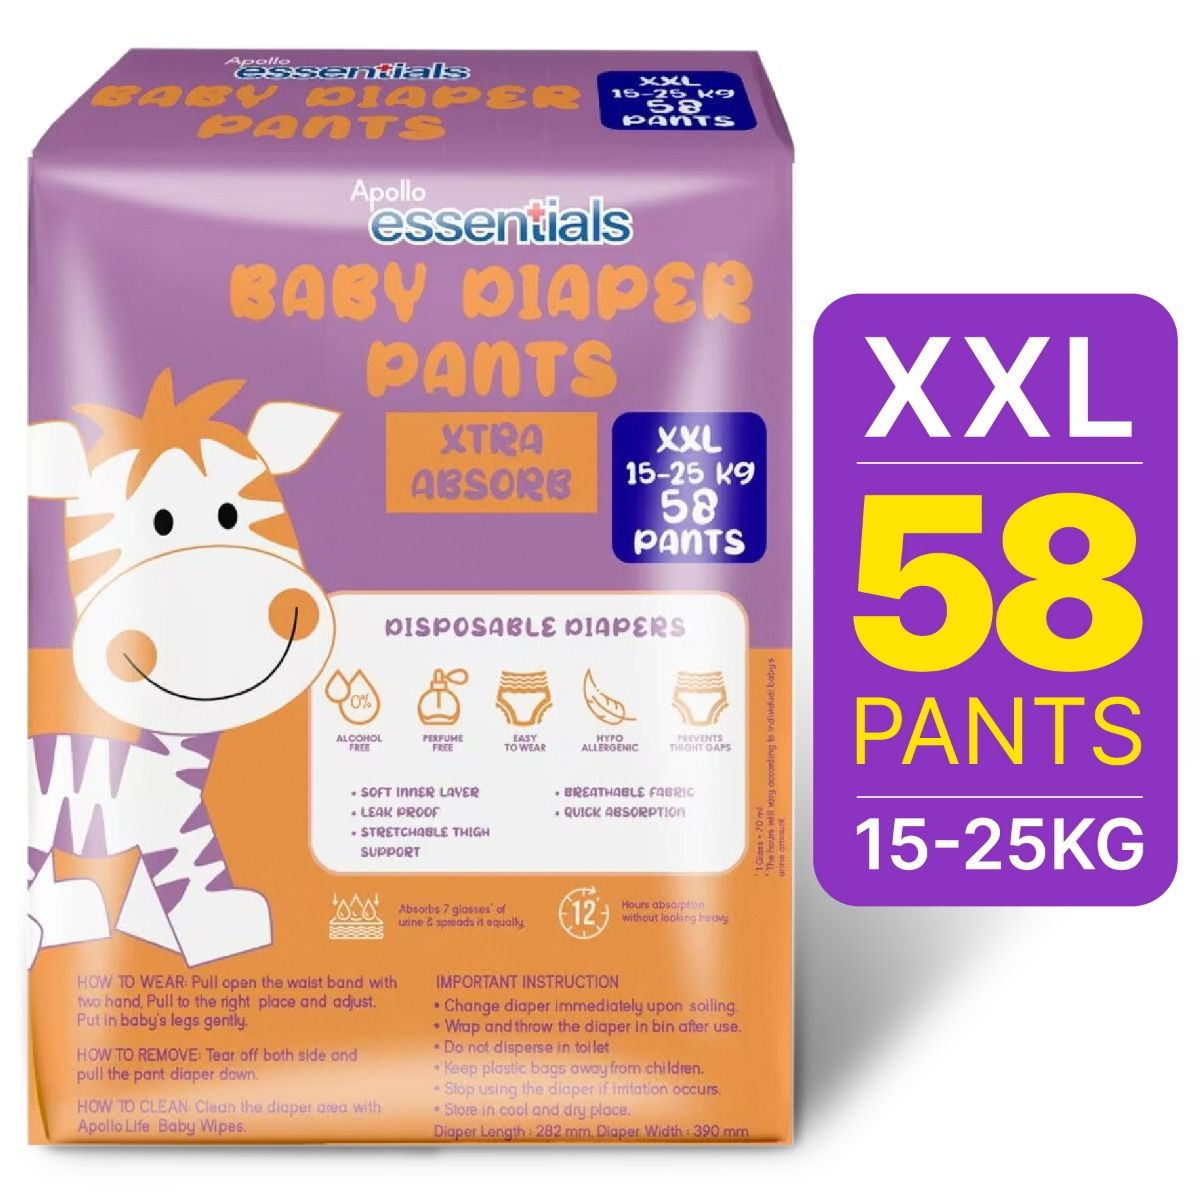 Buy Apollo Essentials Extra Absorb Baby Diaper Pants XXL, 58 Count Online